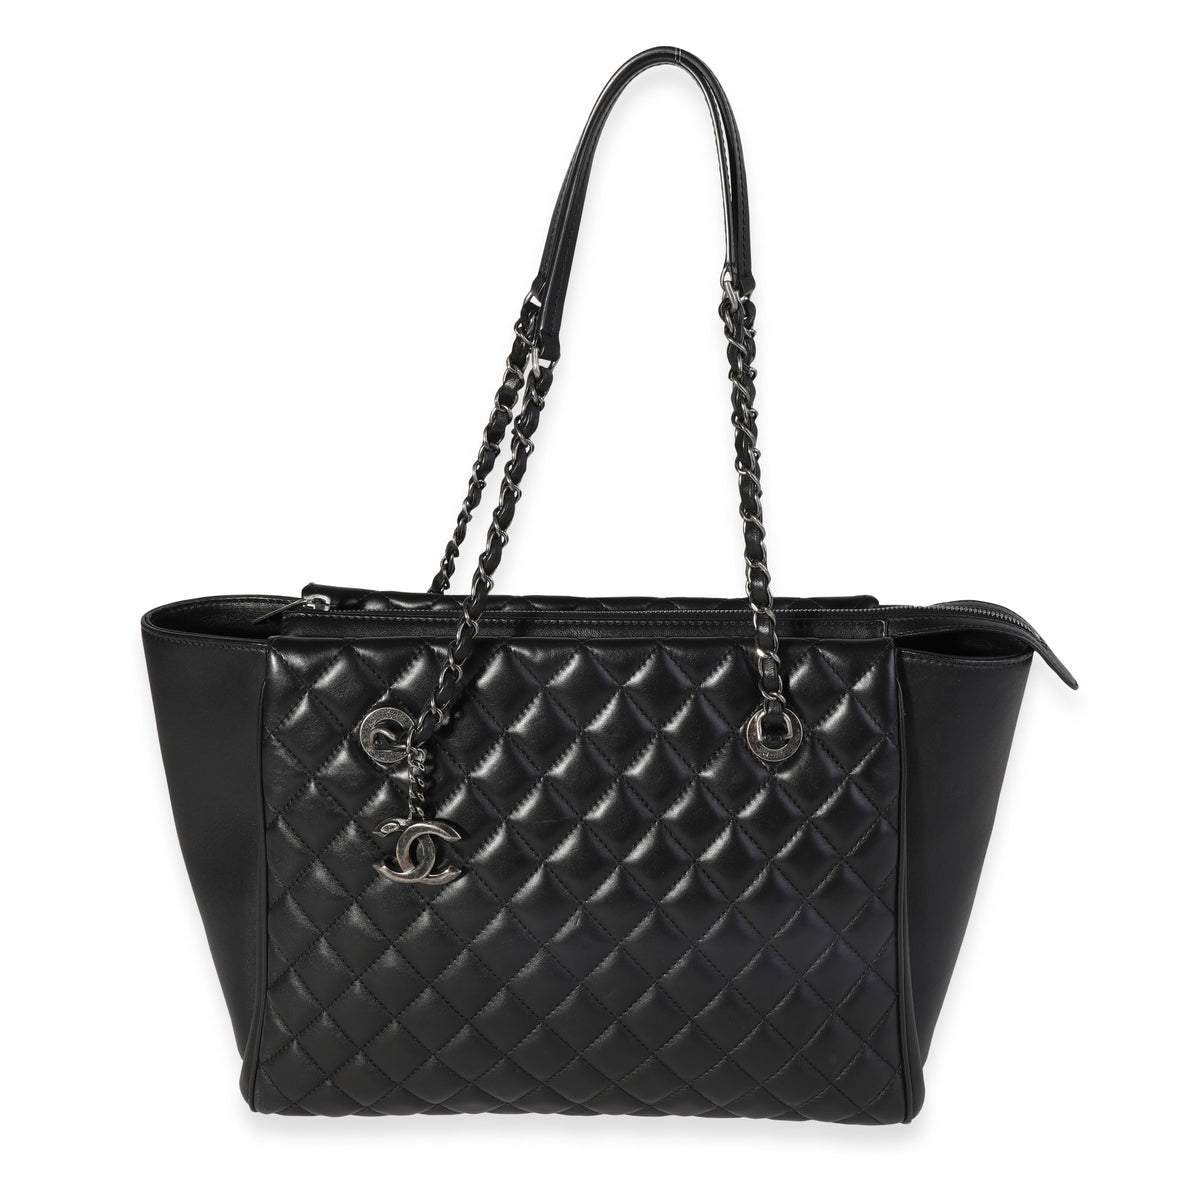 Chanel Black Quilted Calfskin Paris-Cosmopolite Shopping Tote